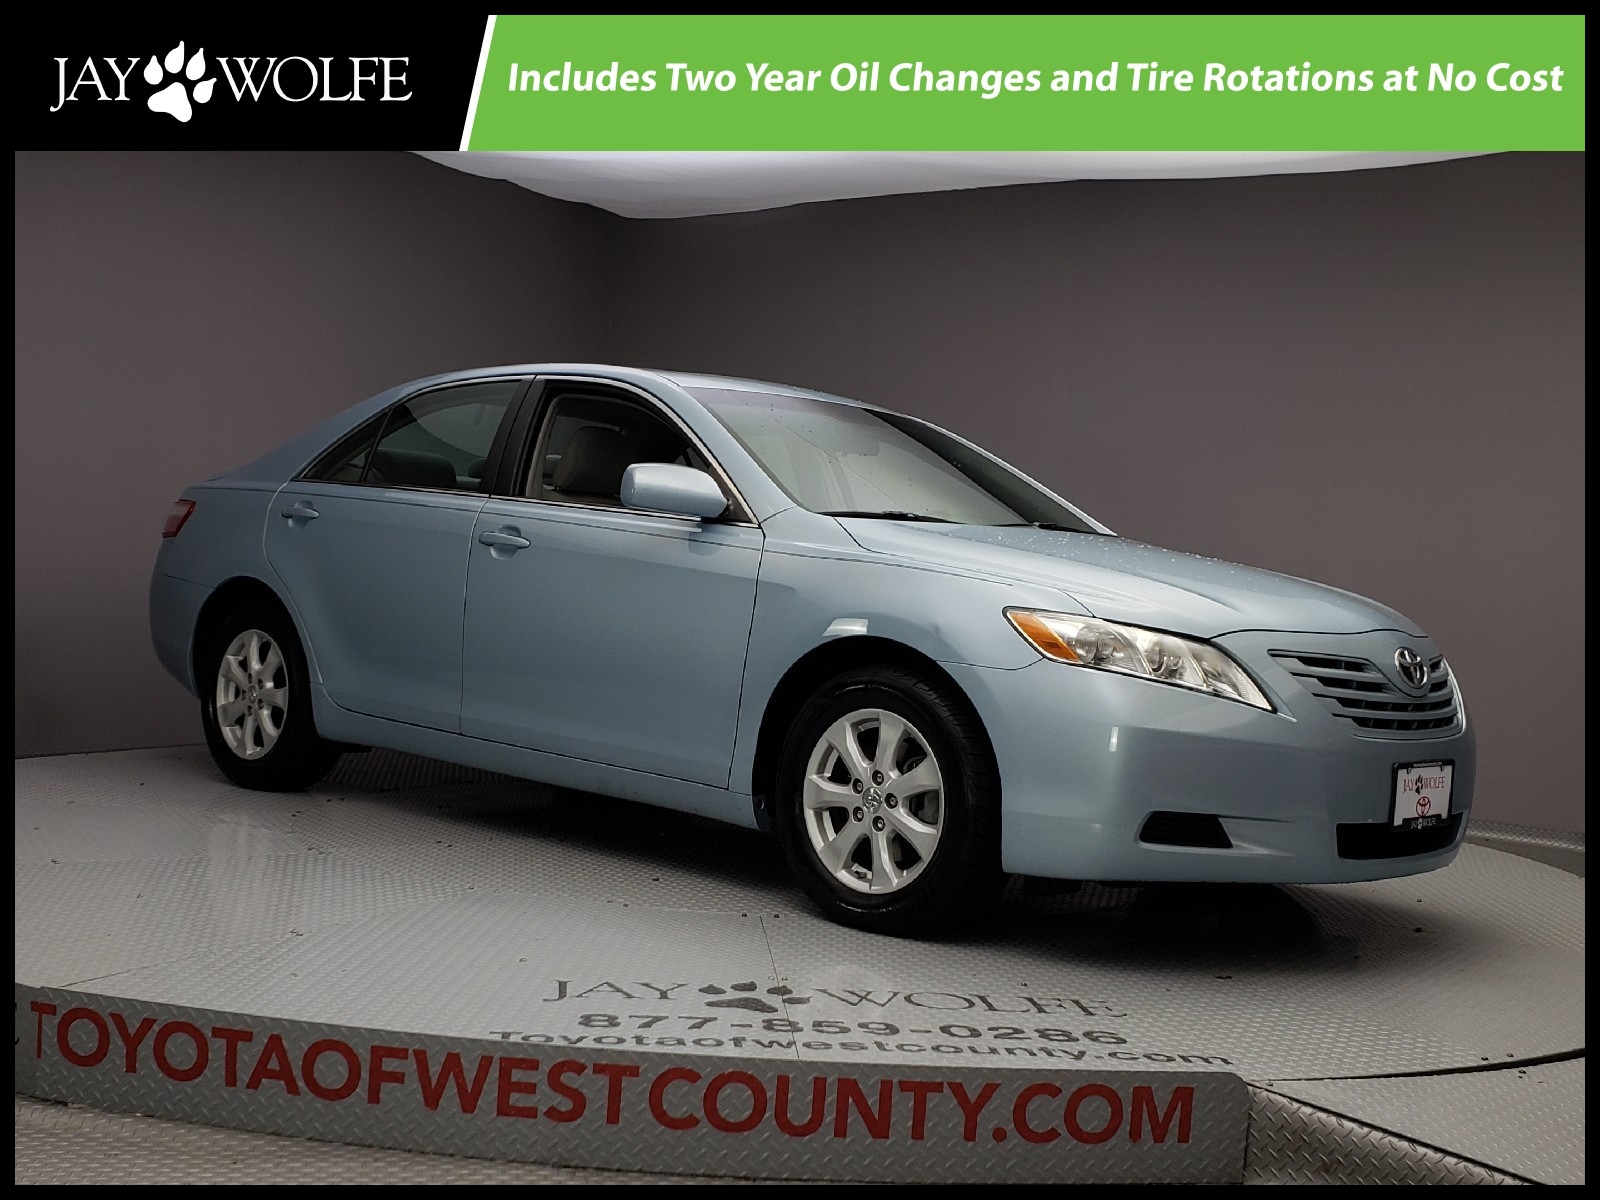 Pre Owned 2009 TOYOTA CAMRY 4DR SDN I4 AUTO LE 4 Door Sedan in Ballwin W A